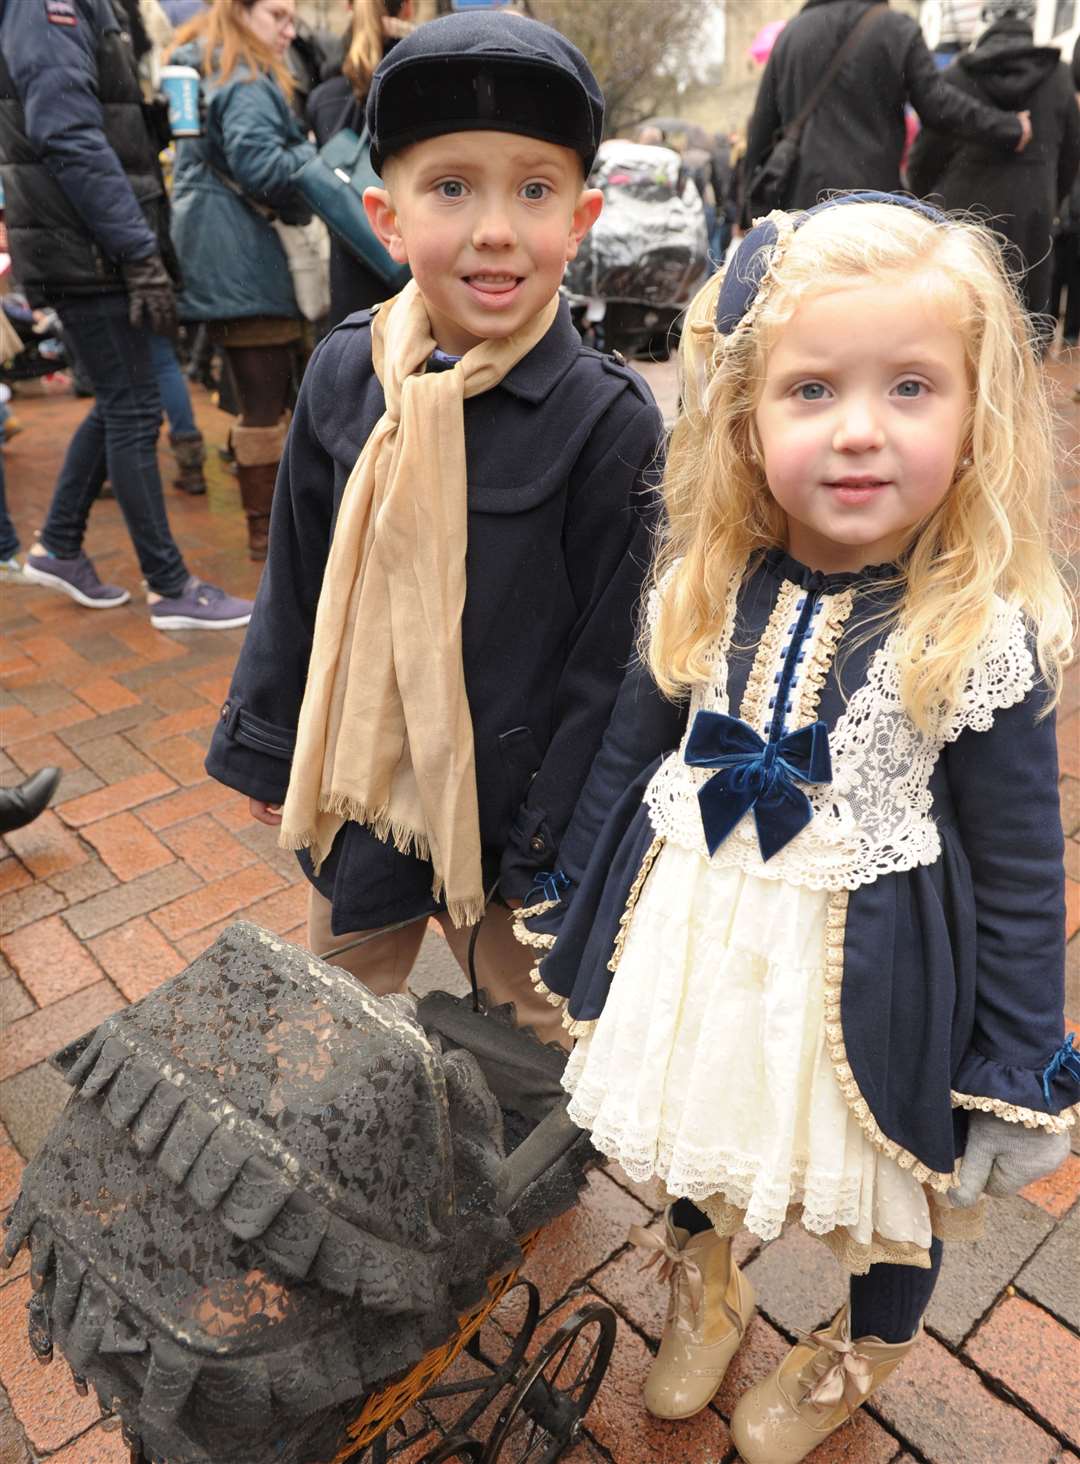 Tyler and Annabella at last year's Christmas Festival Picture: Steve Crispe